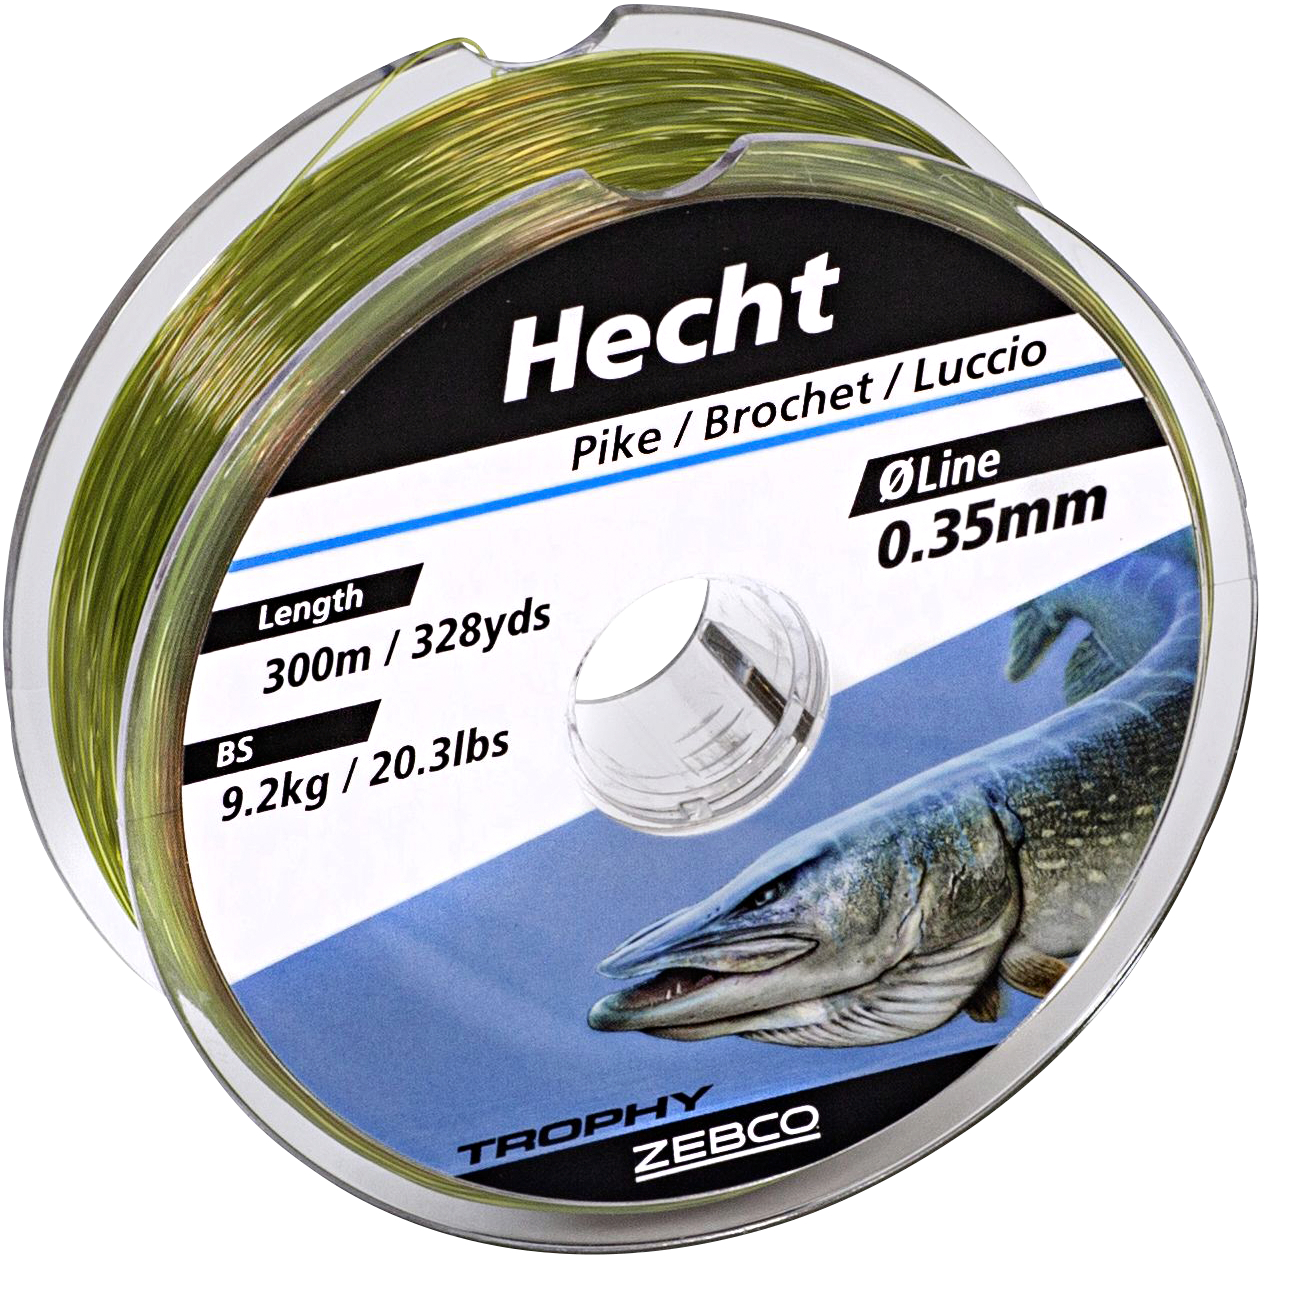 Zebco Trophy fishing line (Pike) 